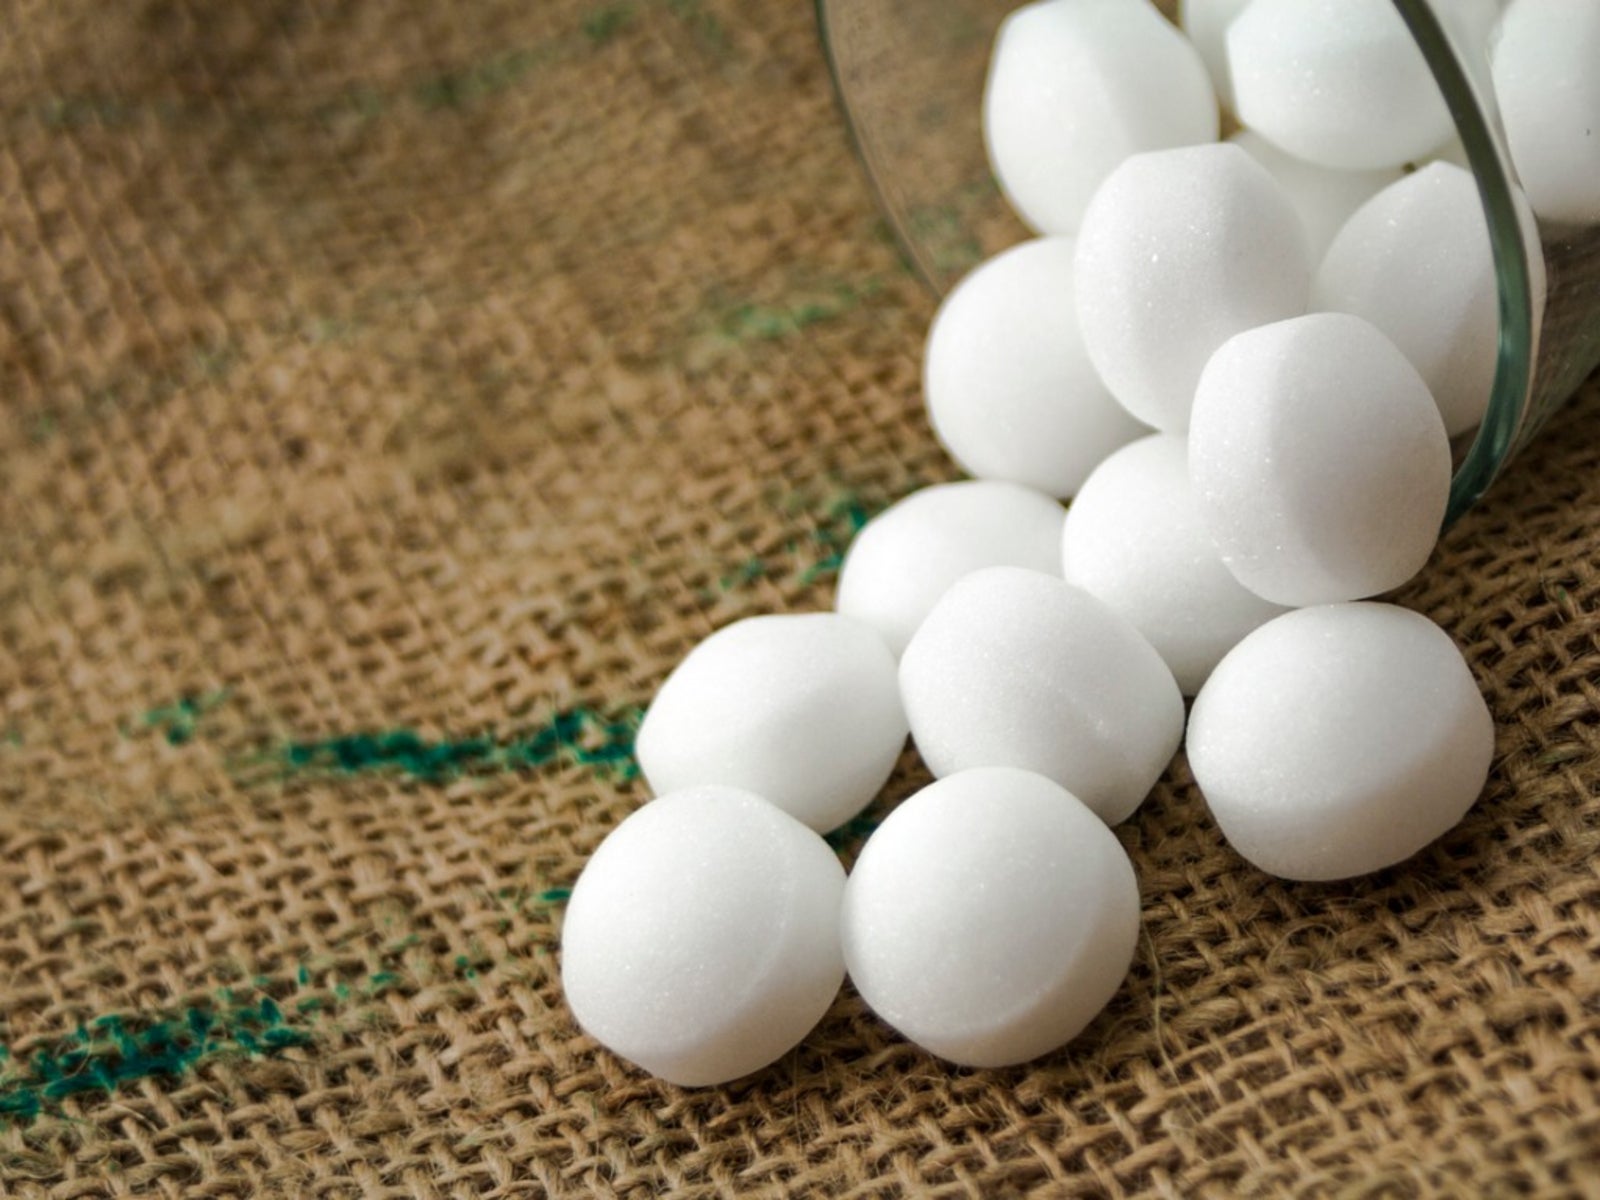 Can I use mothballs to repel insects or animals?